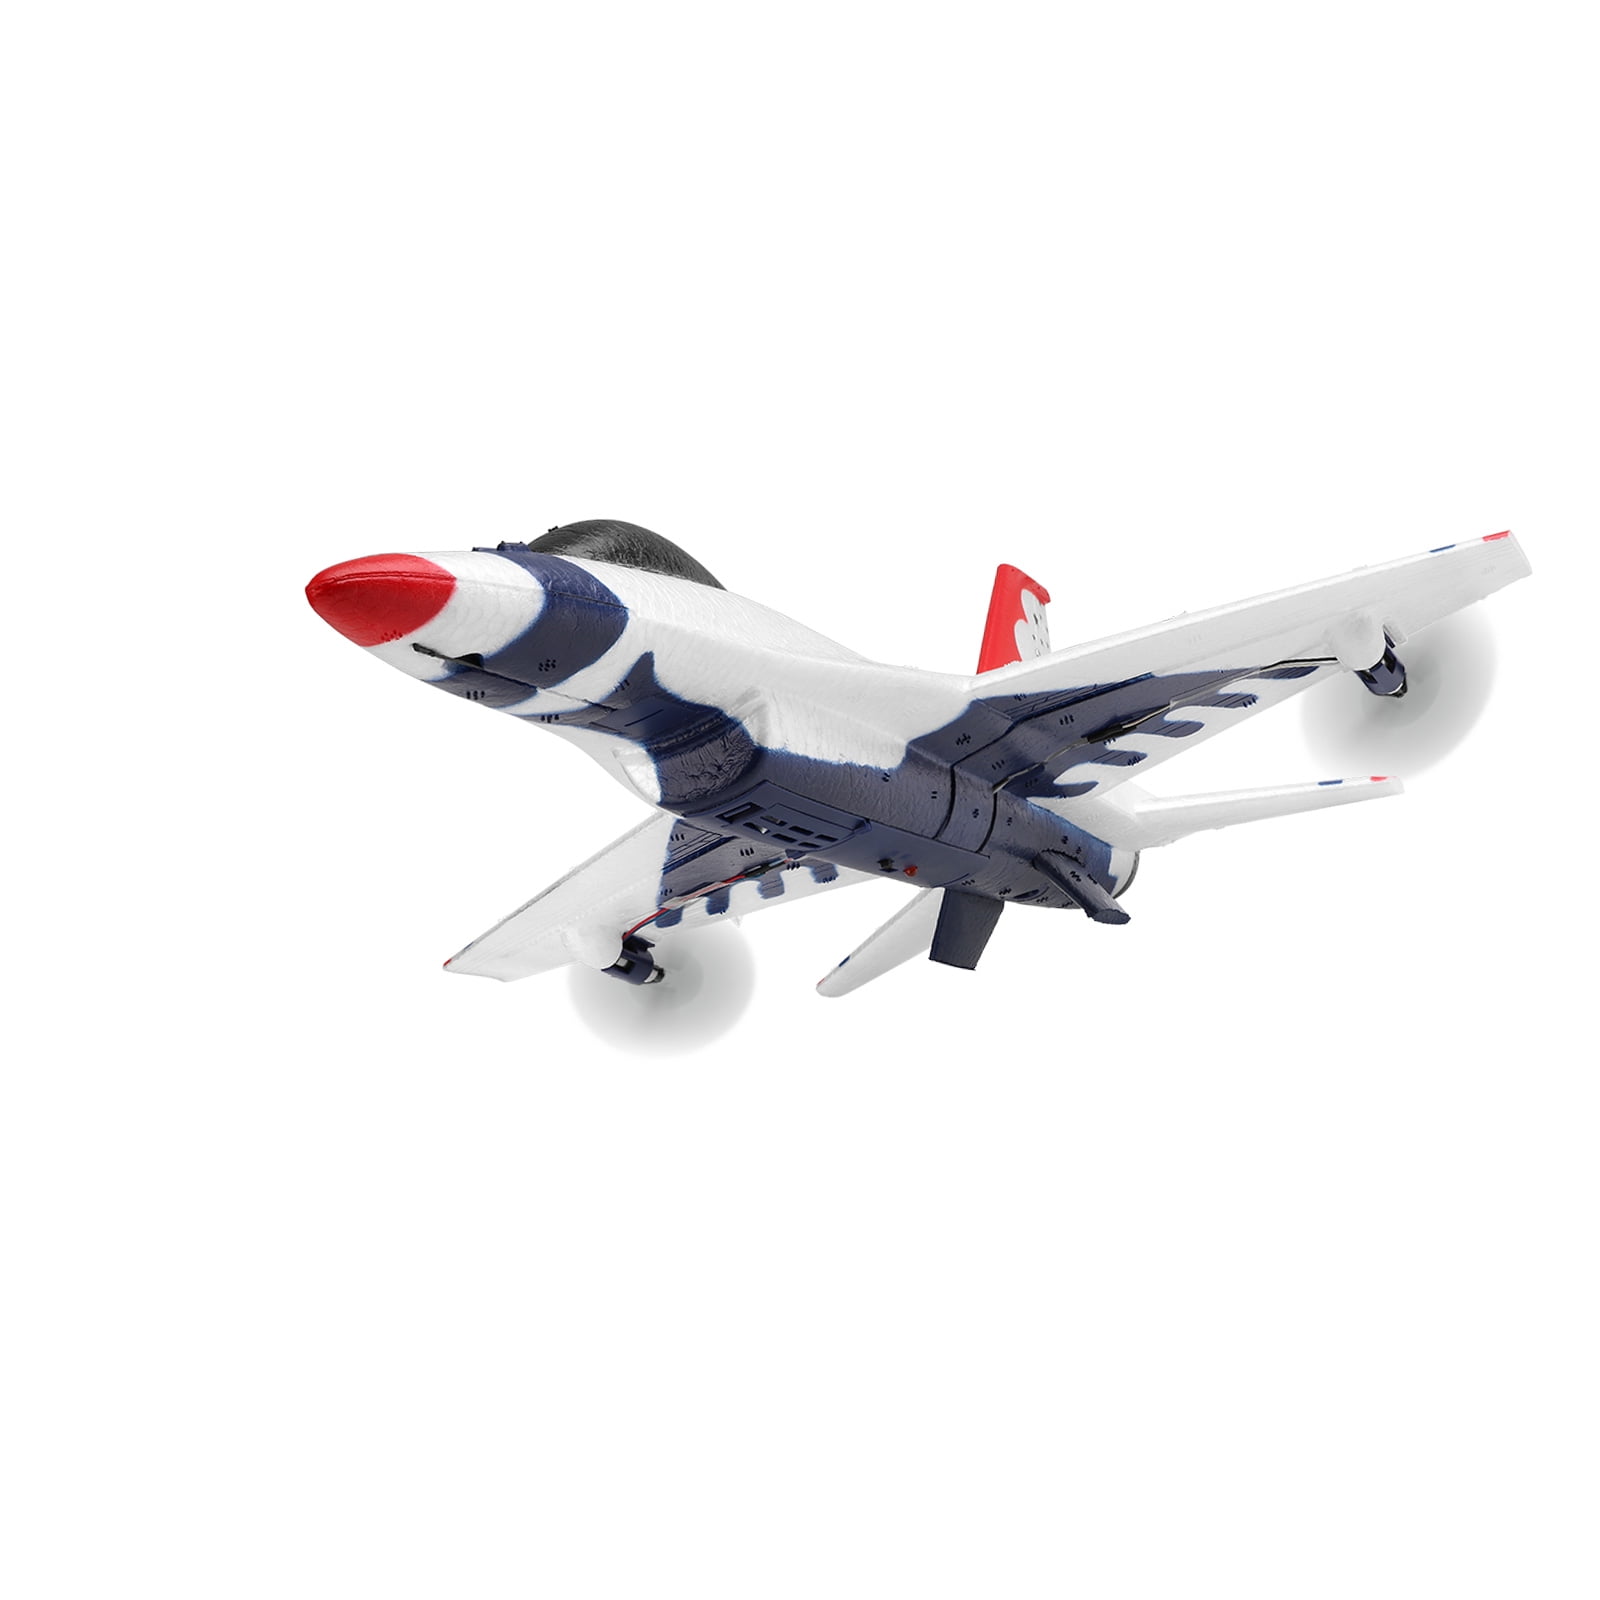 GoolRC A200 F-16B RC Airplane 2.4GHz 2CH RC Plane Flight Toys for Kids Boys with 1 Battery